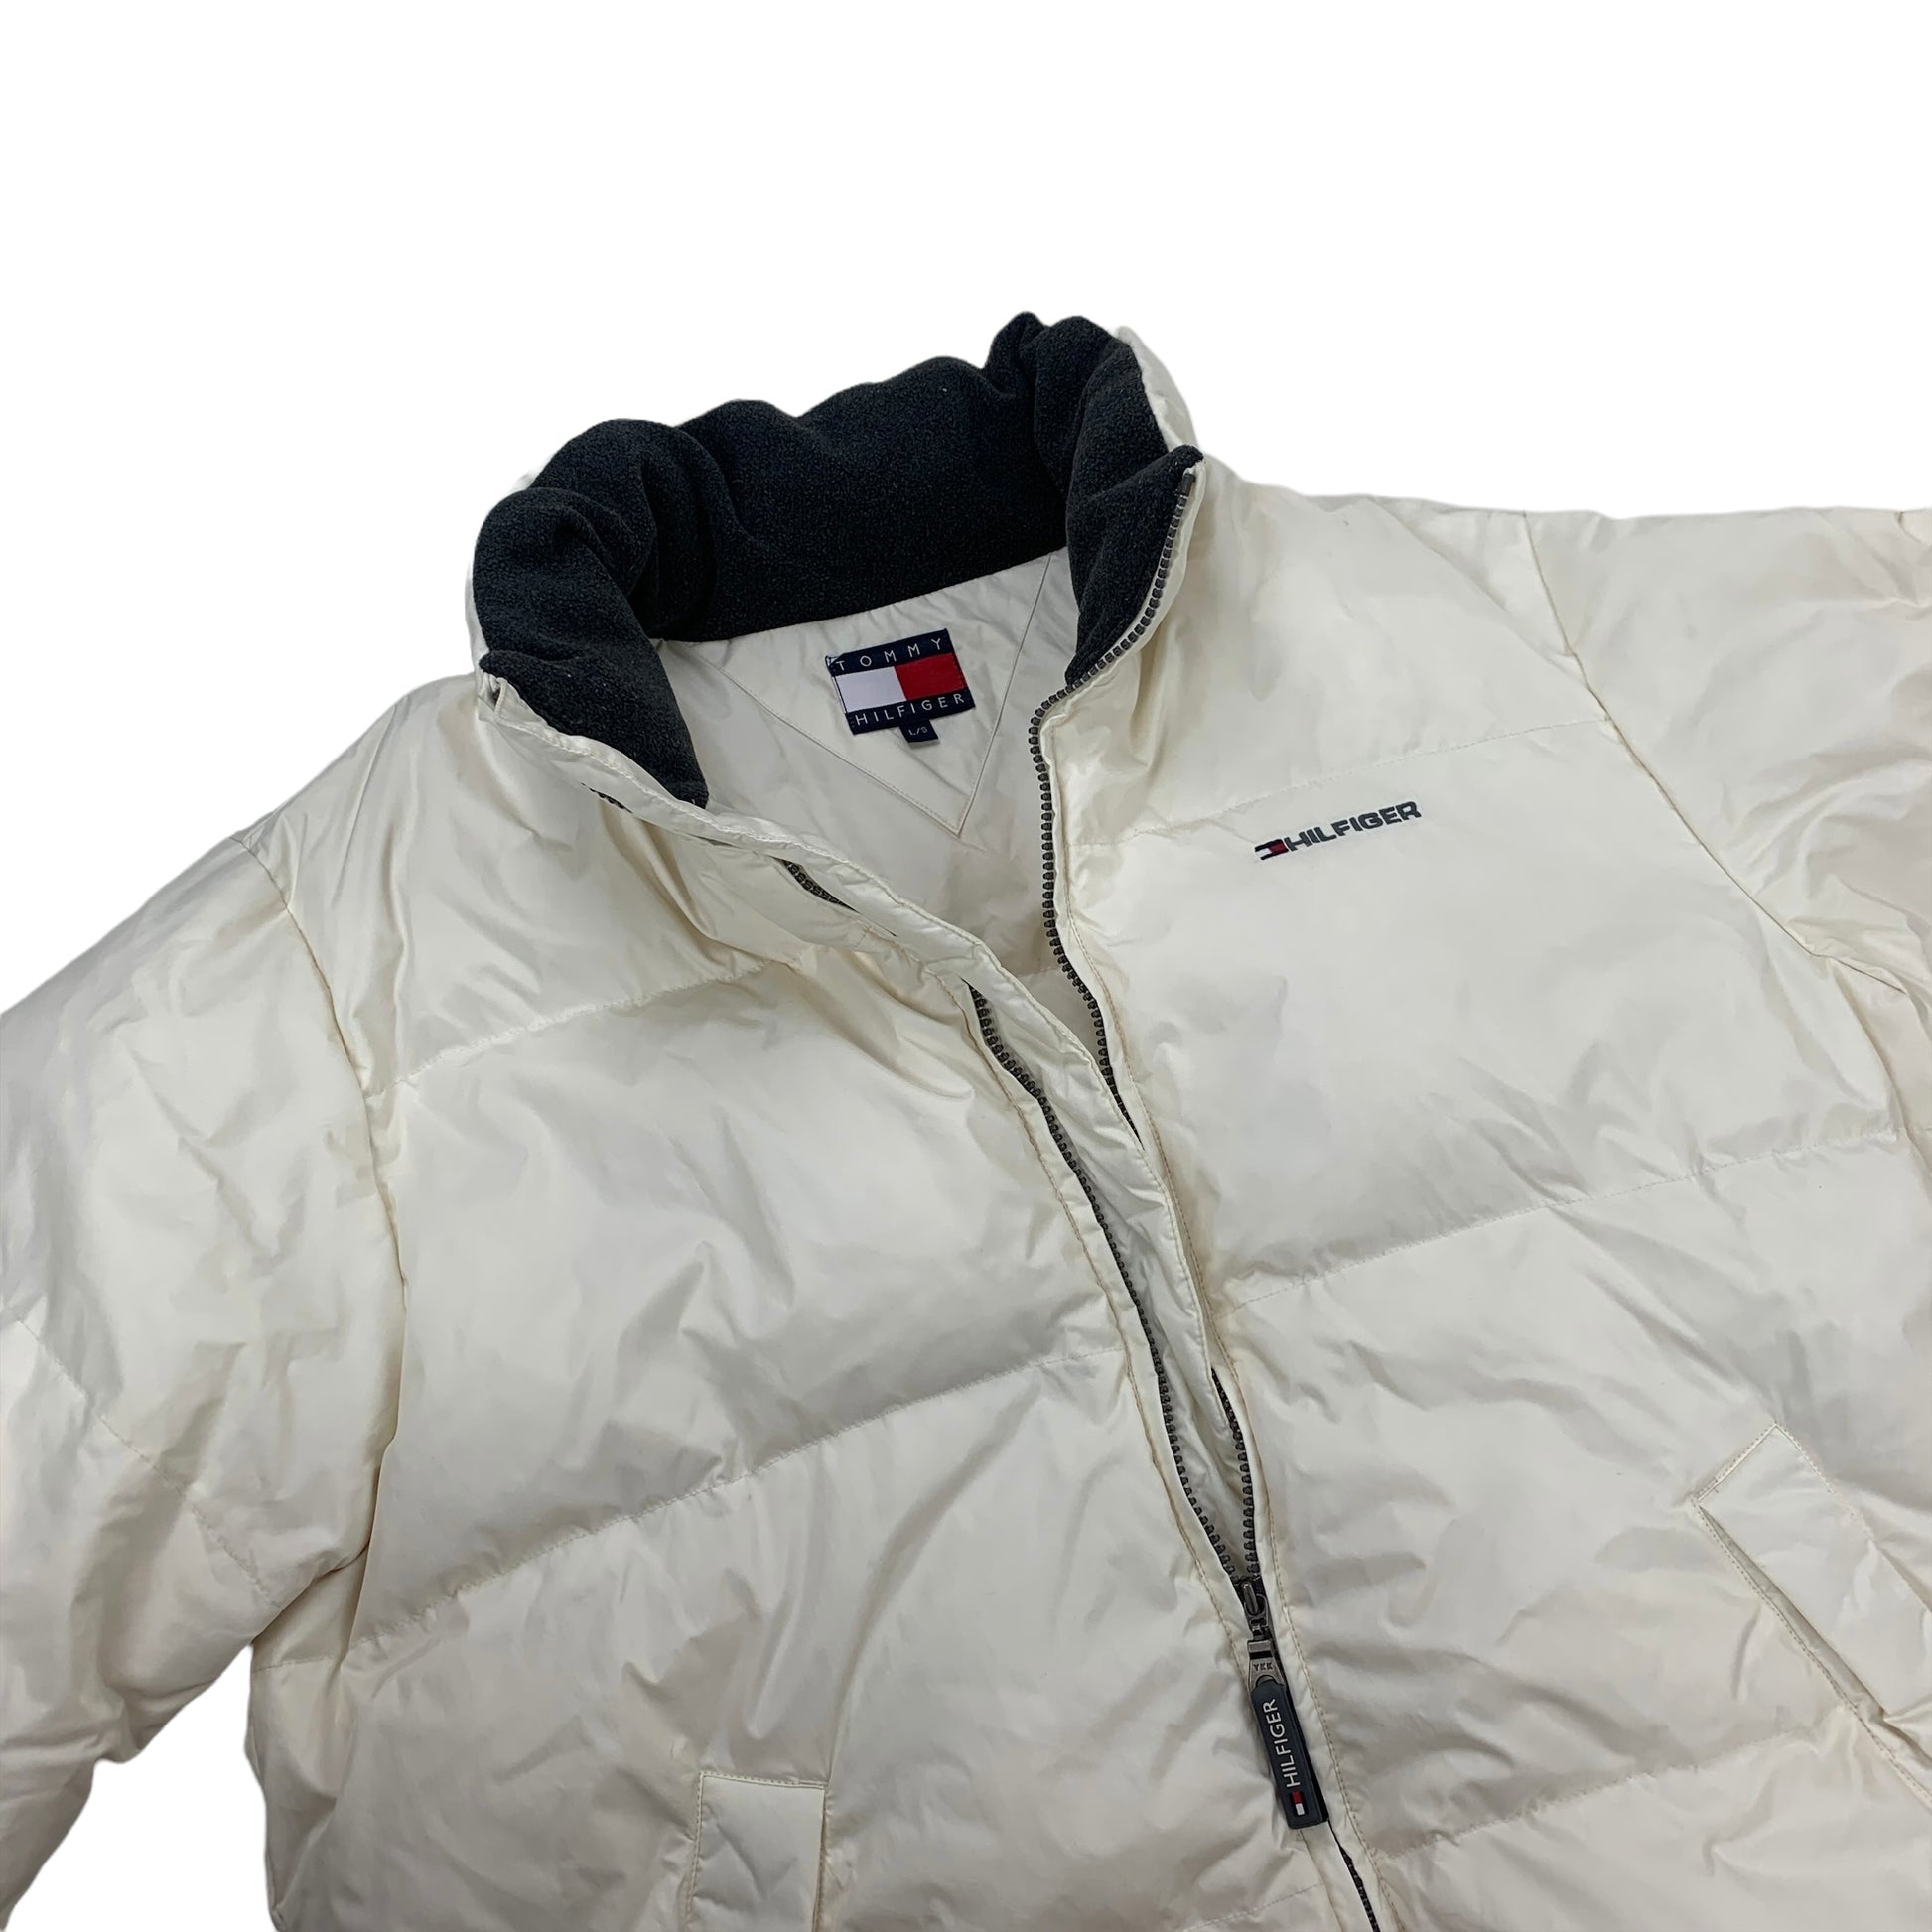 Tommy Hilfiger Puffer Jacket-pufferseasonwinter-secondhand-austria-vintage-sustainable-pre-owned-deal-sale-puffer-down-coat